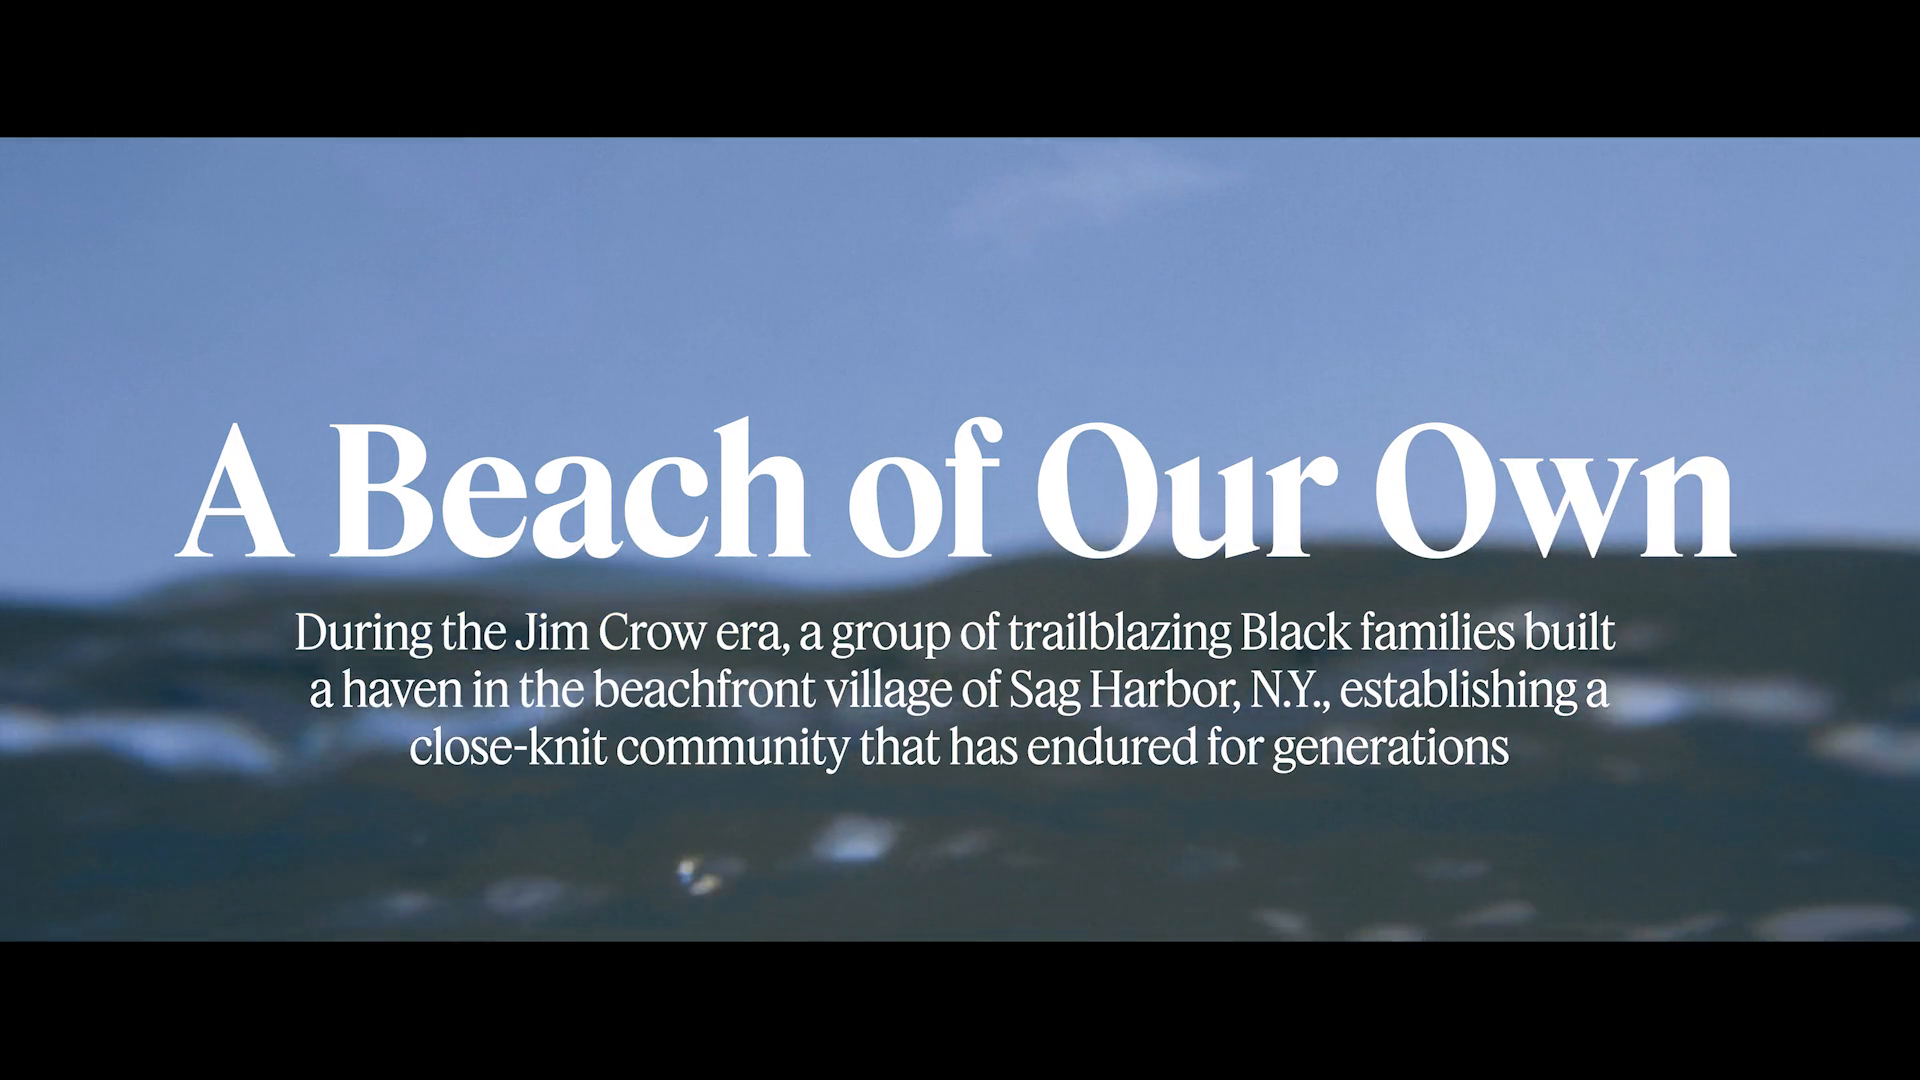 New York Times - A Beach of Our Own